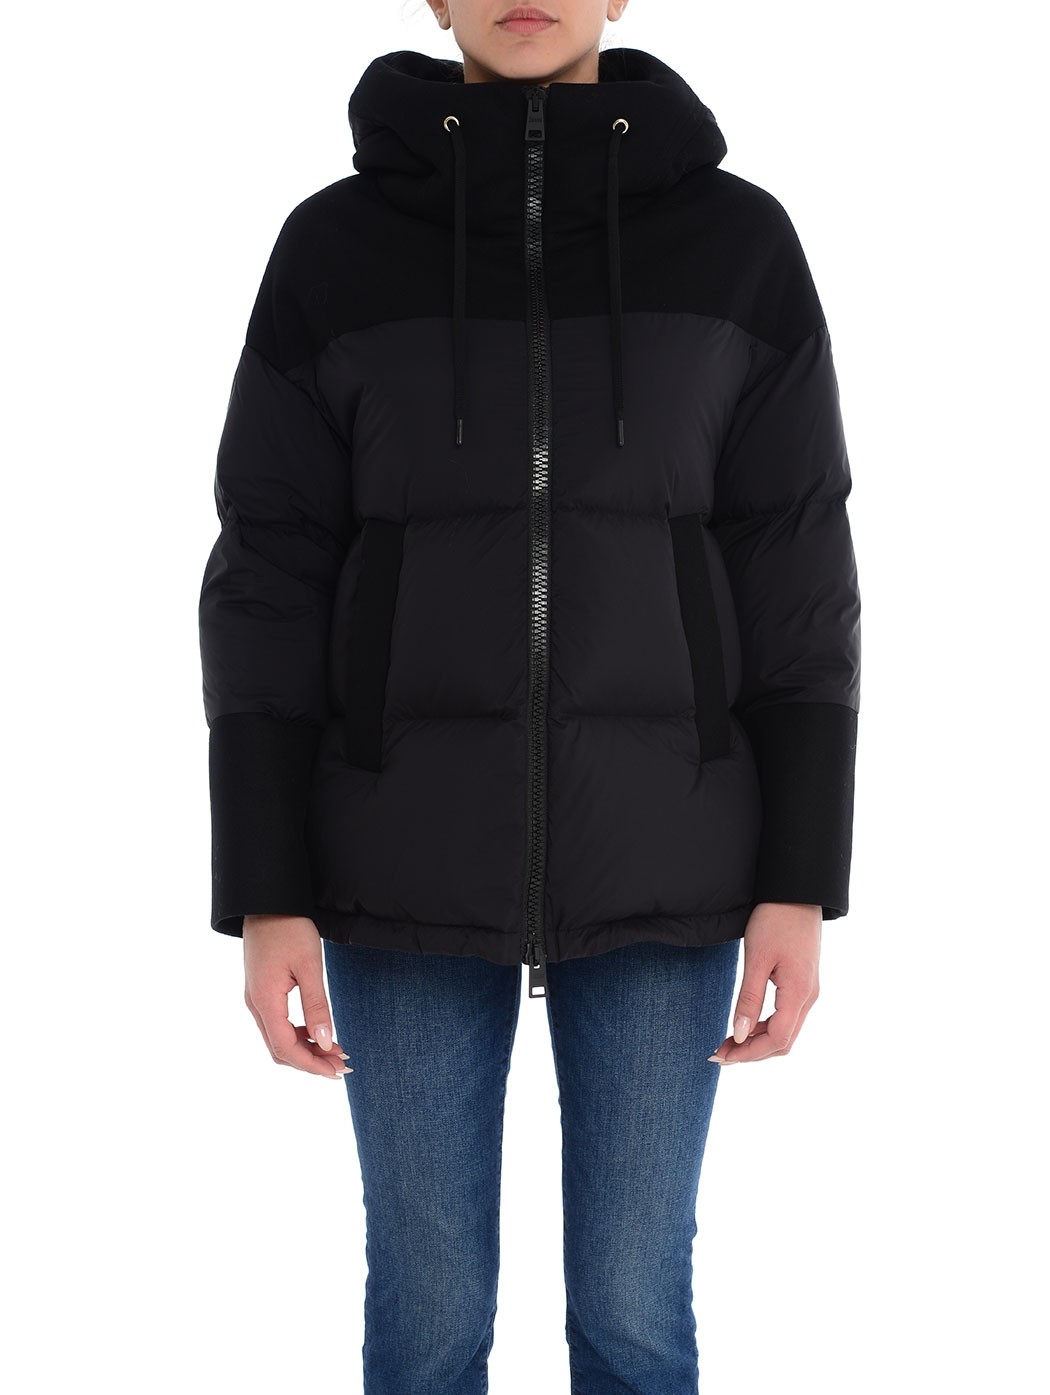  down jackets,removable hoods,WOMEN DOWN JACKETS,MONCLER PADDED JACKETS,WOOLRICH ARCTIC PARKA,HERNO DOWN JACKETS  HERNO PI001538-39601